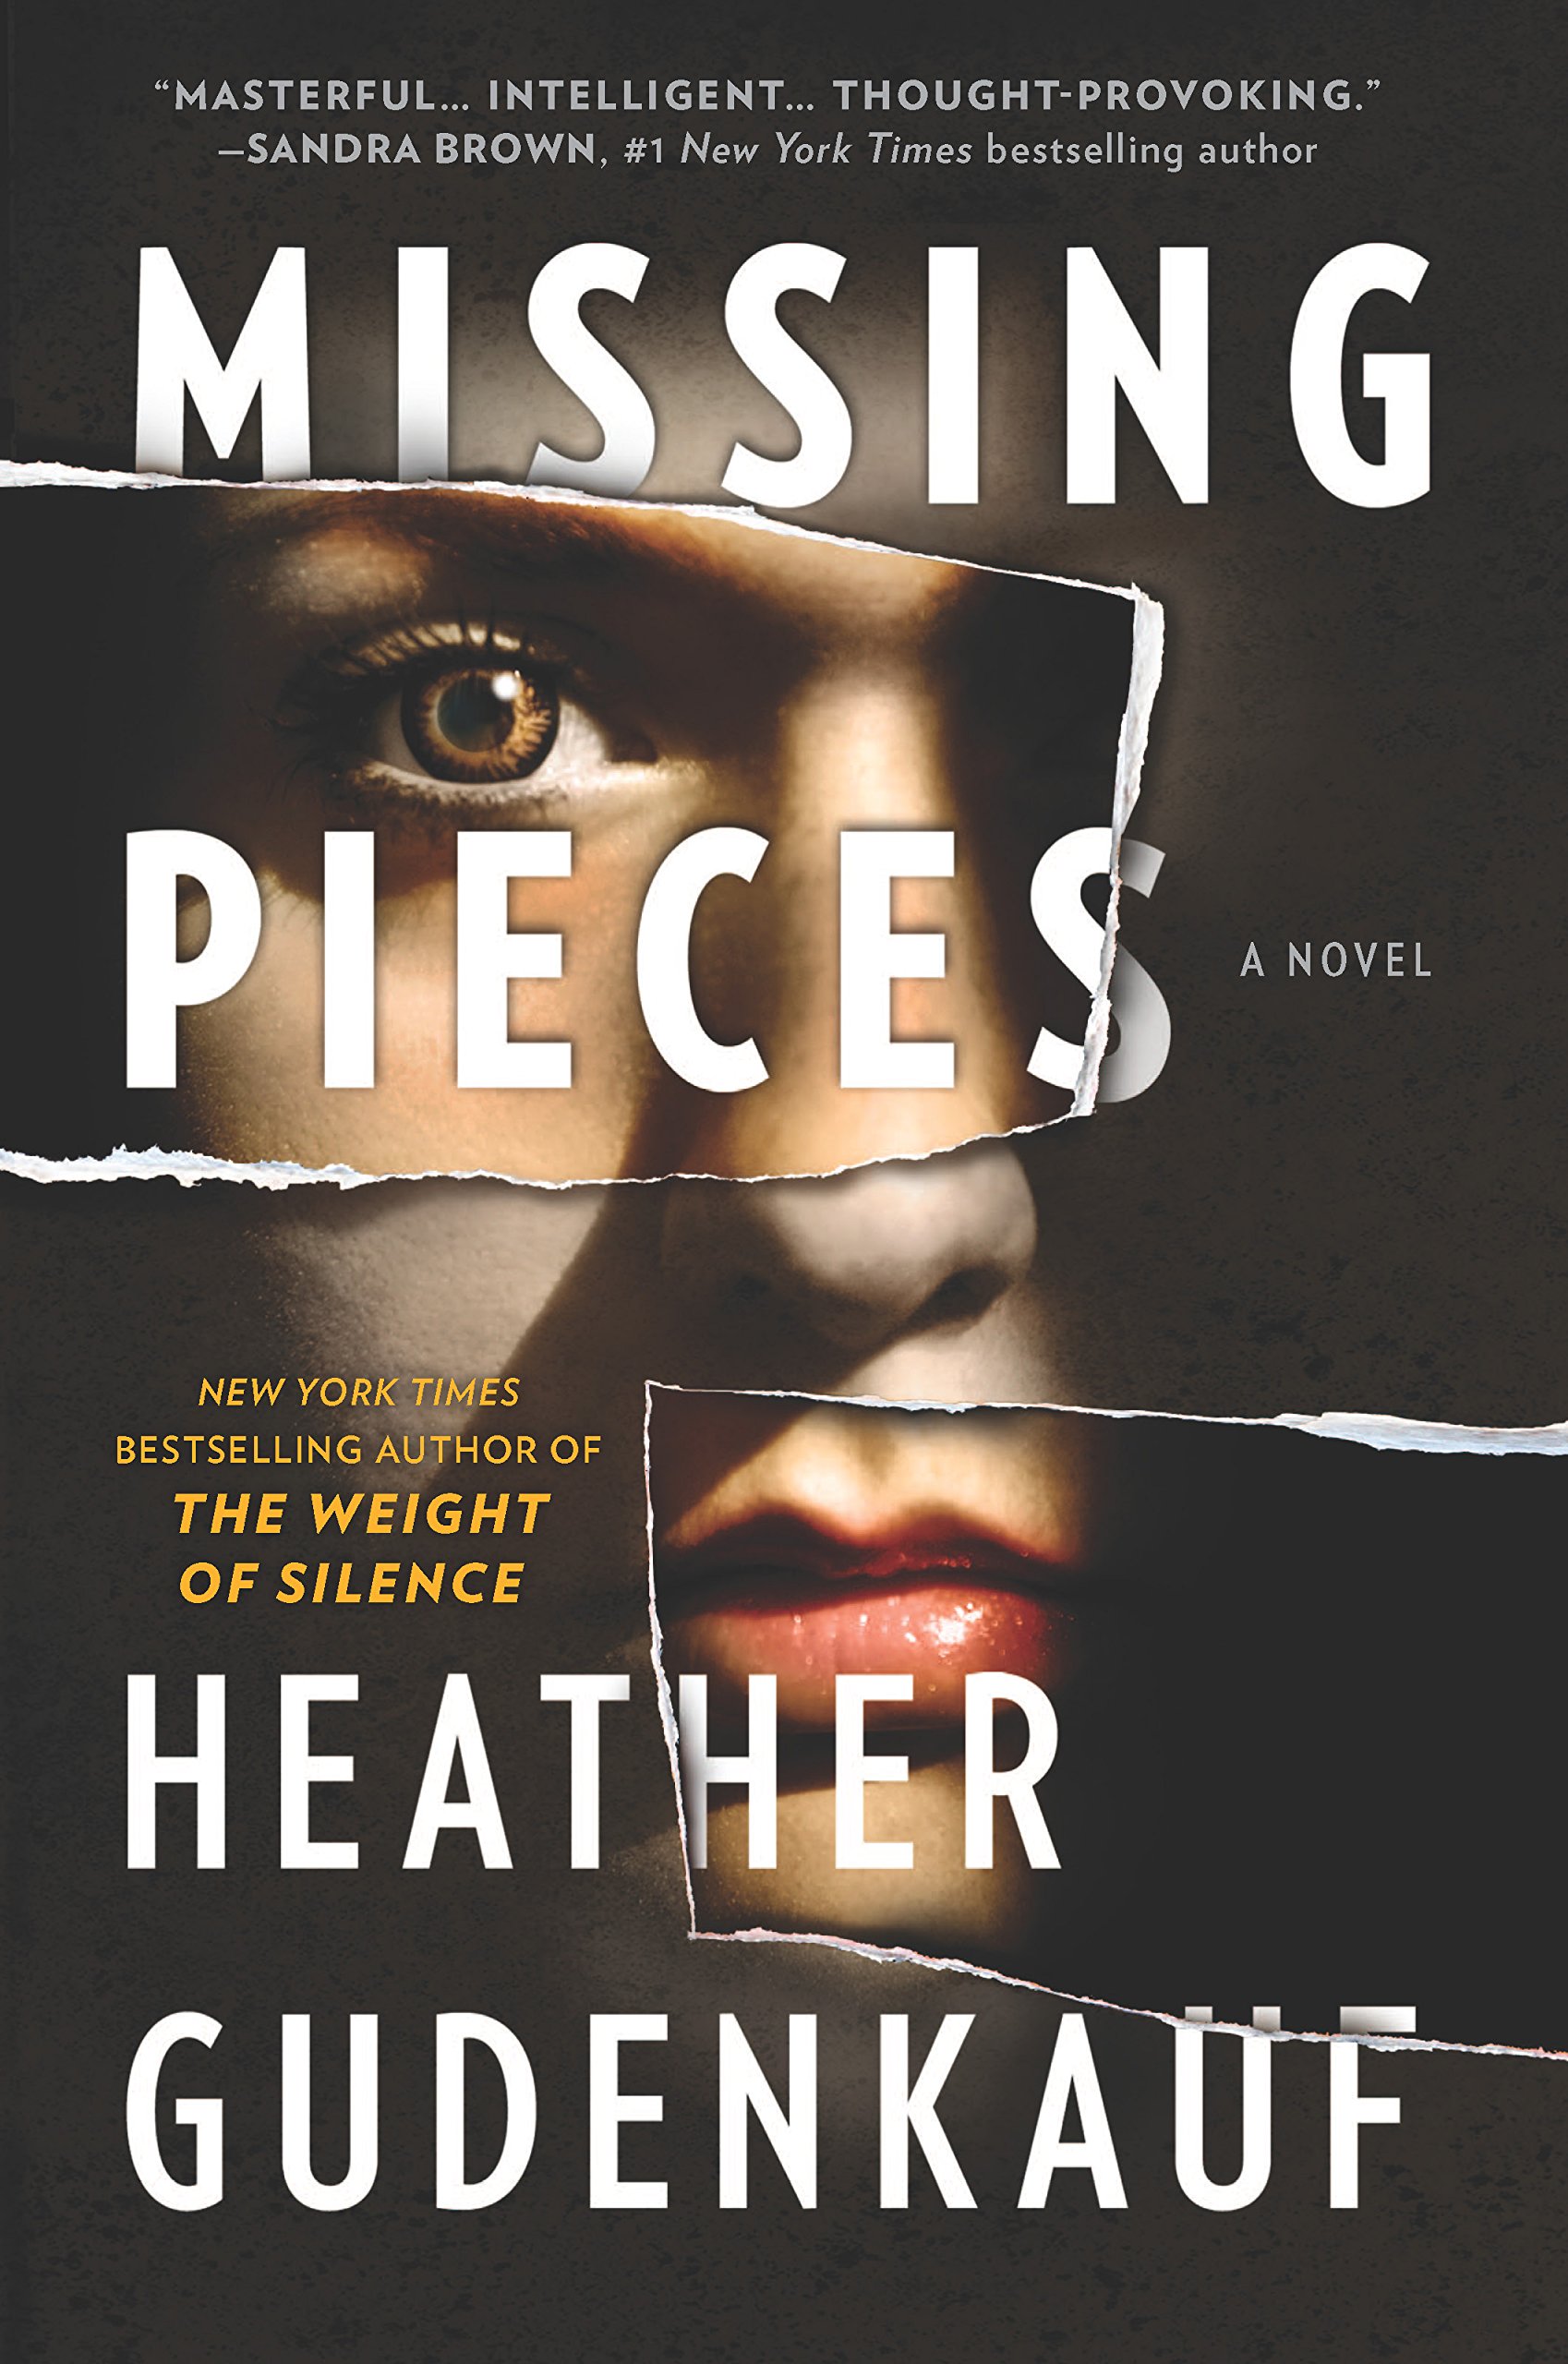 Missing Pieces by Heather Gudenkauf book cover